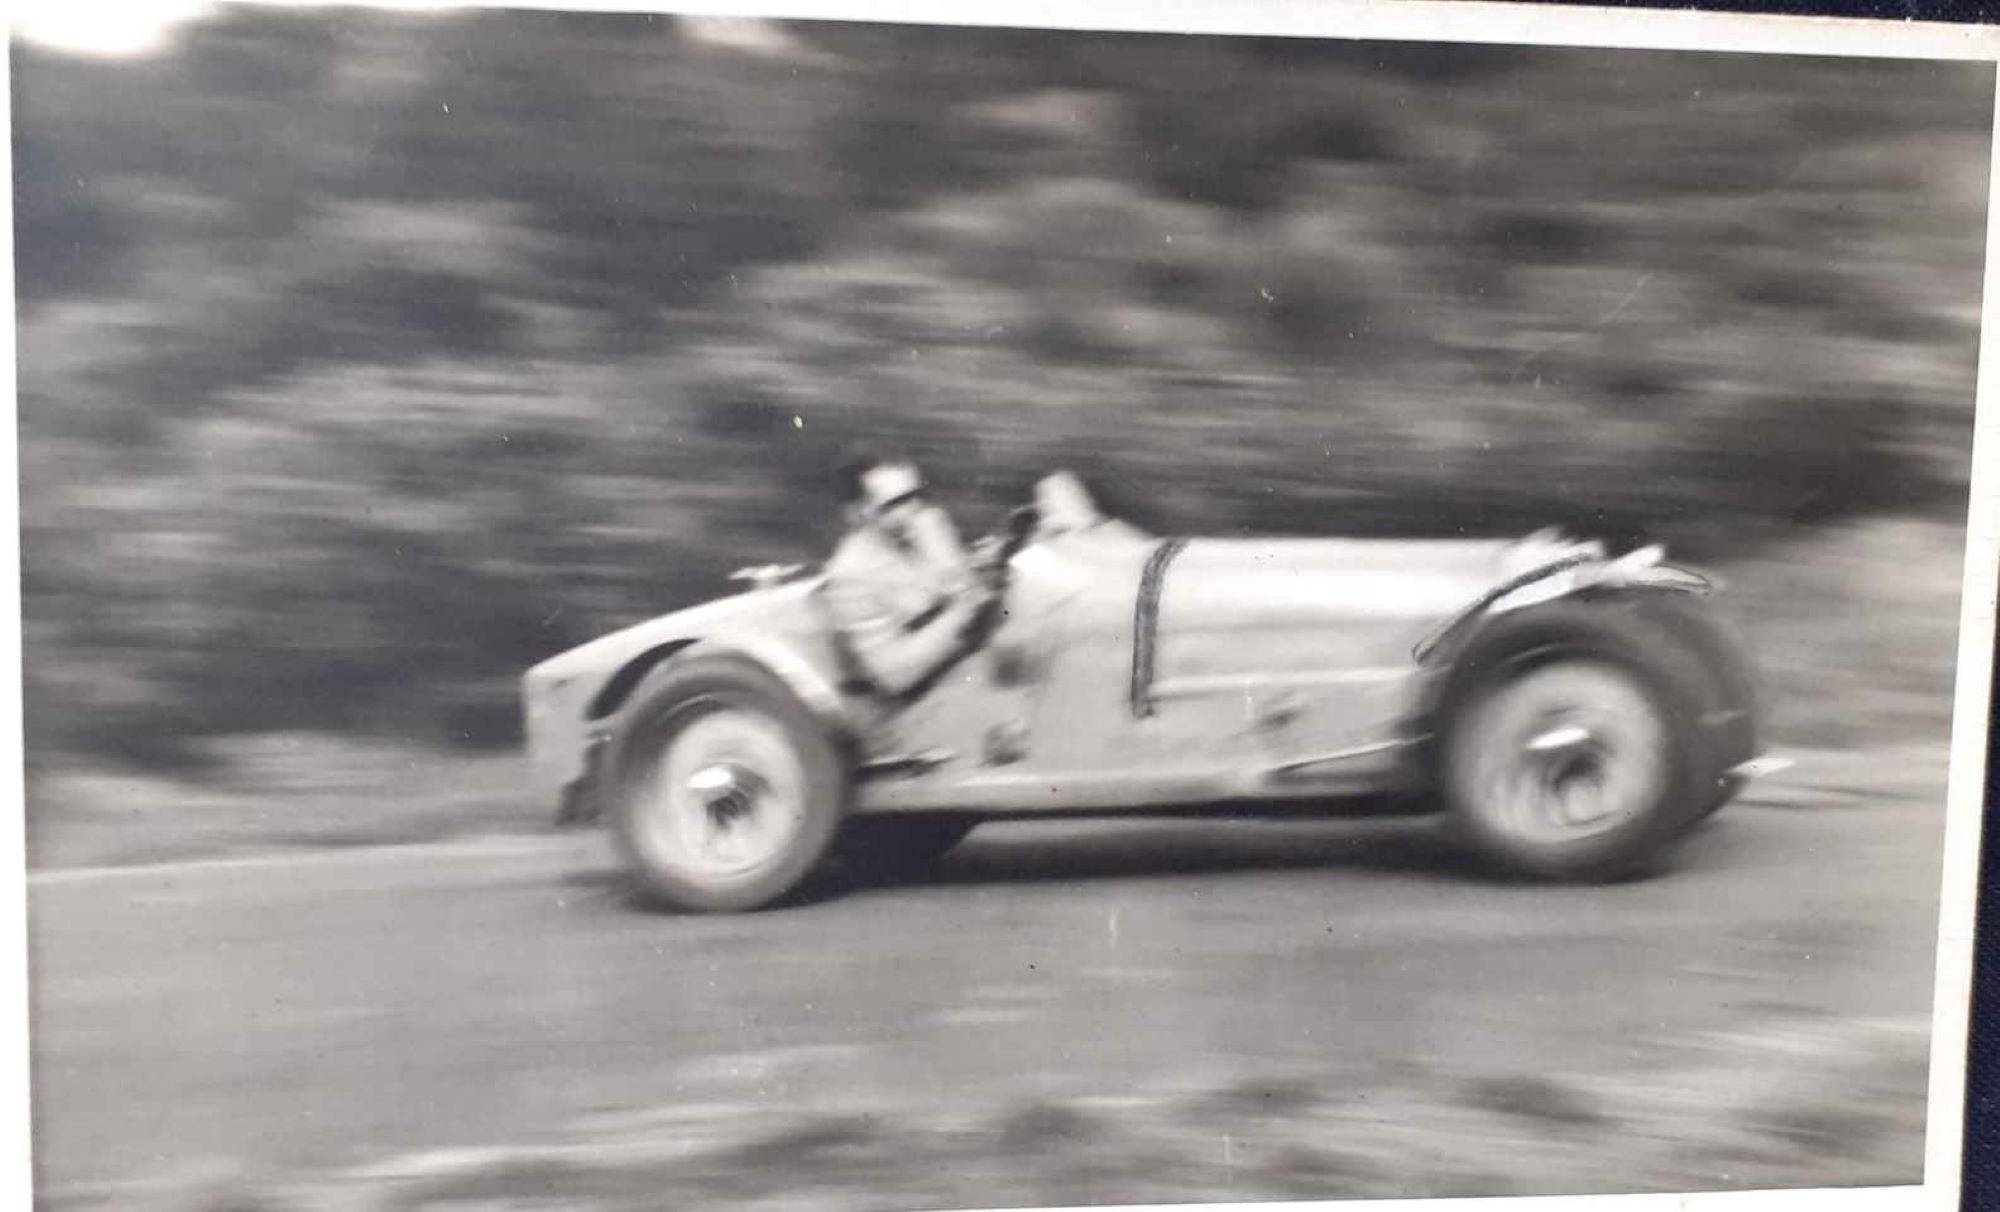 Name:  NSCC 1950 #0116 Bugatti T35 at speed - light colour 1950's - image Graeme Wells arch Anthony Wel.jpg
Views: 210
Size:  158.1 KB